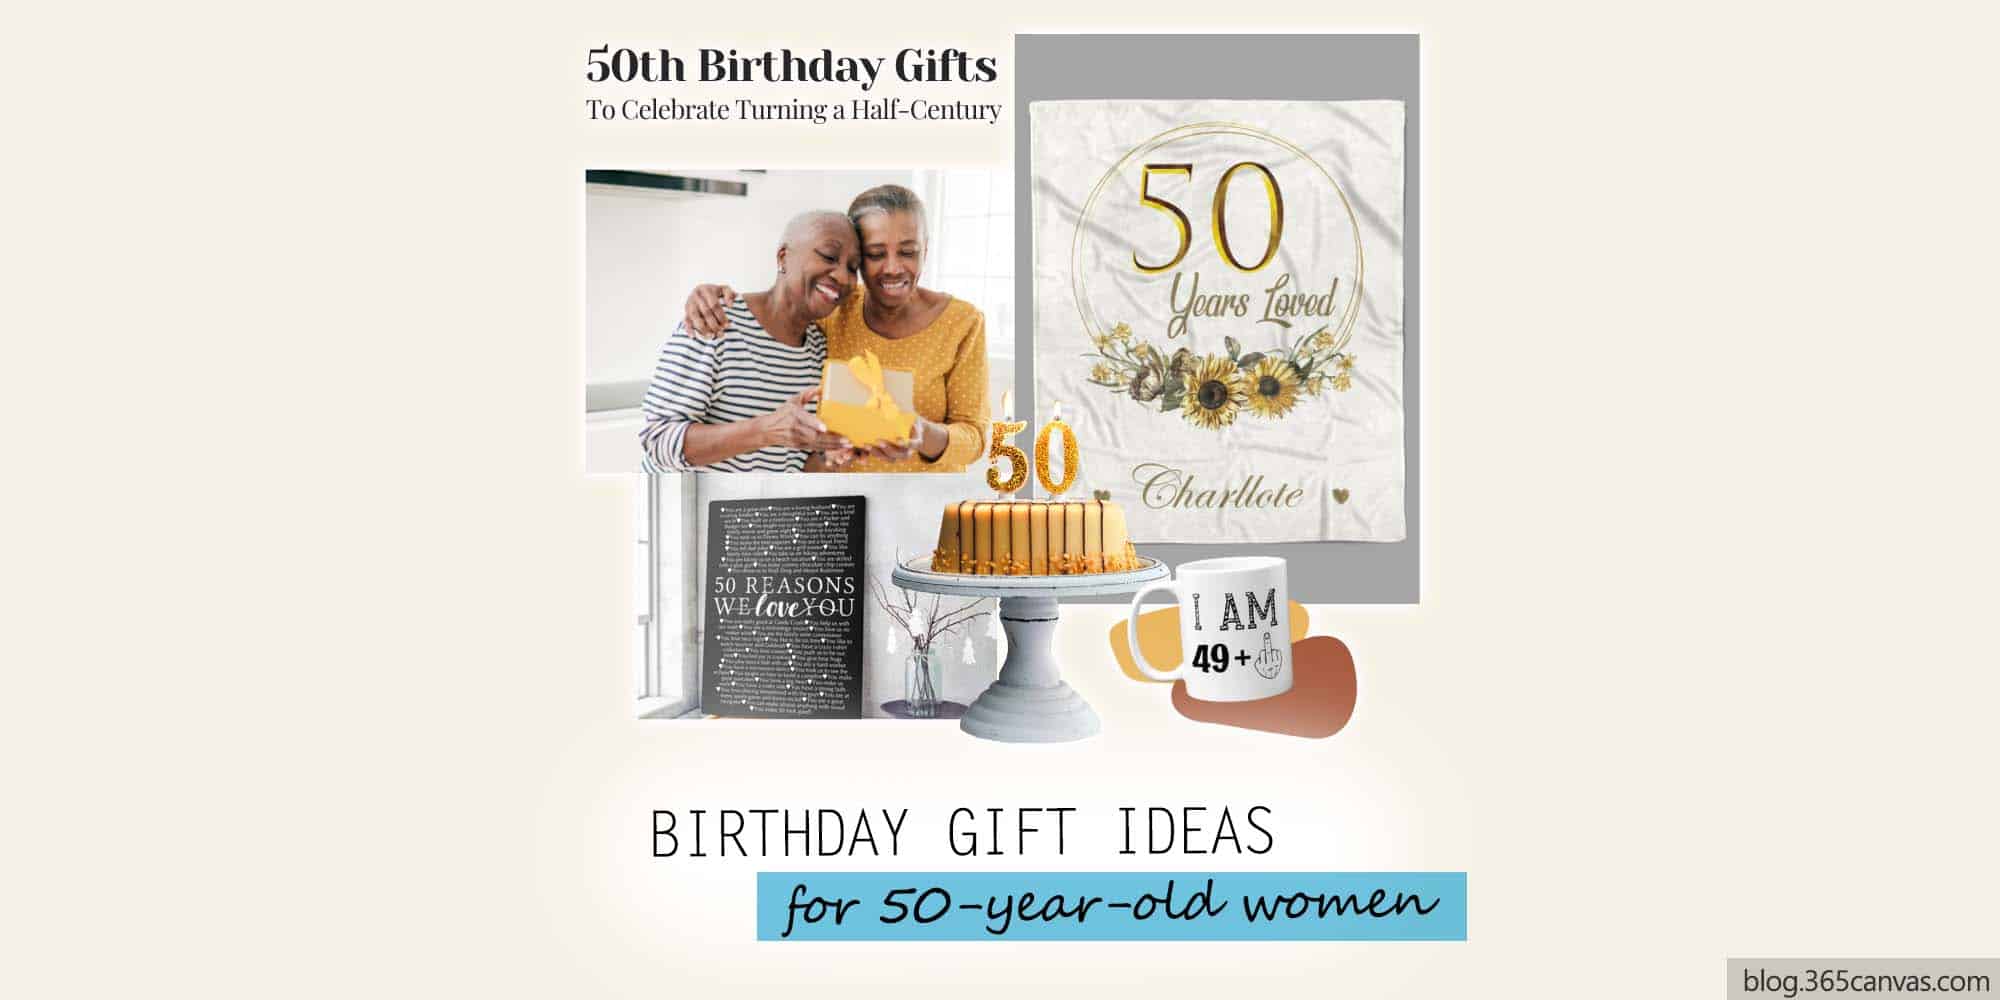 39 Best 50th Birthday Gift Ideas For Women To Celebrate Five Decades Of Life (2022)